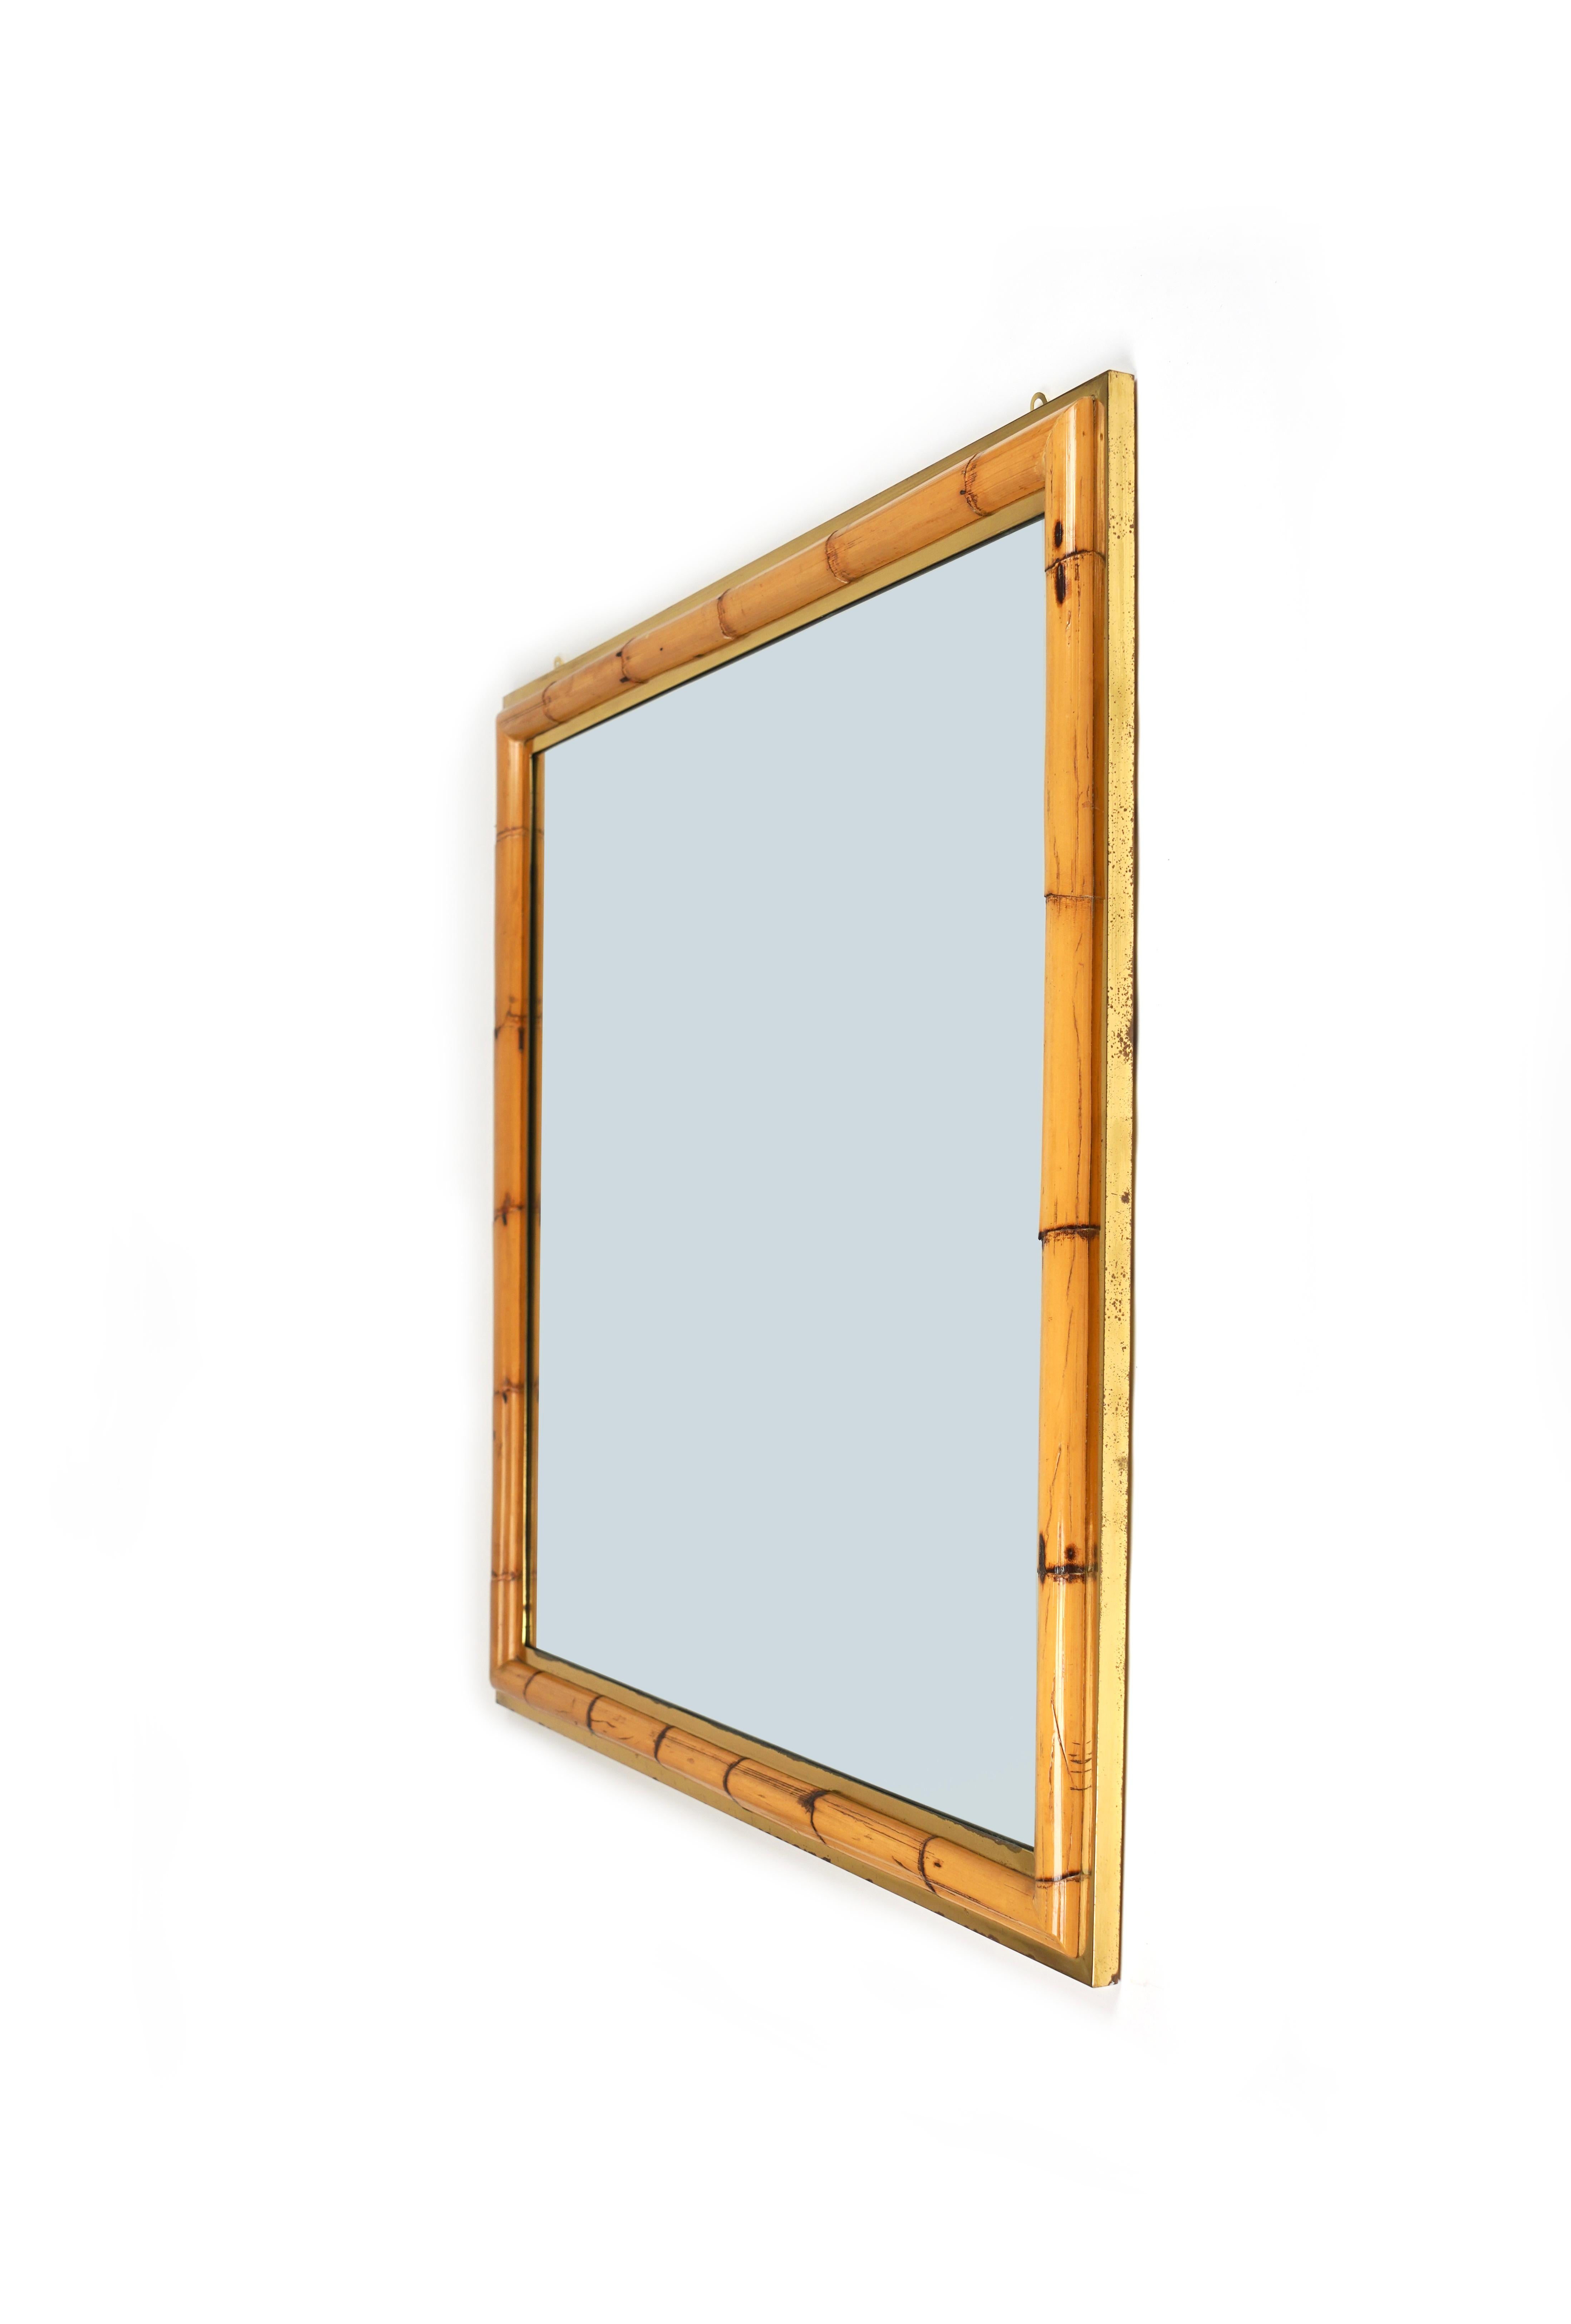 Midcentury Squared Wall Mirror in Brass and Bamboo, Italy, 1970s In Good Condition For Sale In Rome, IT